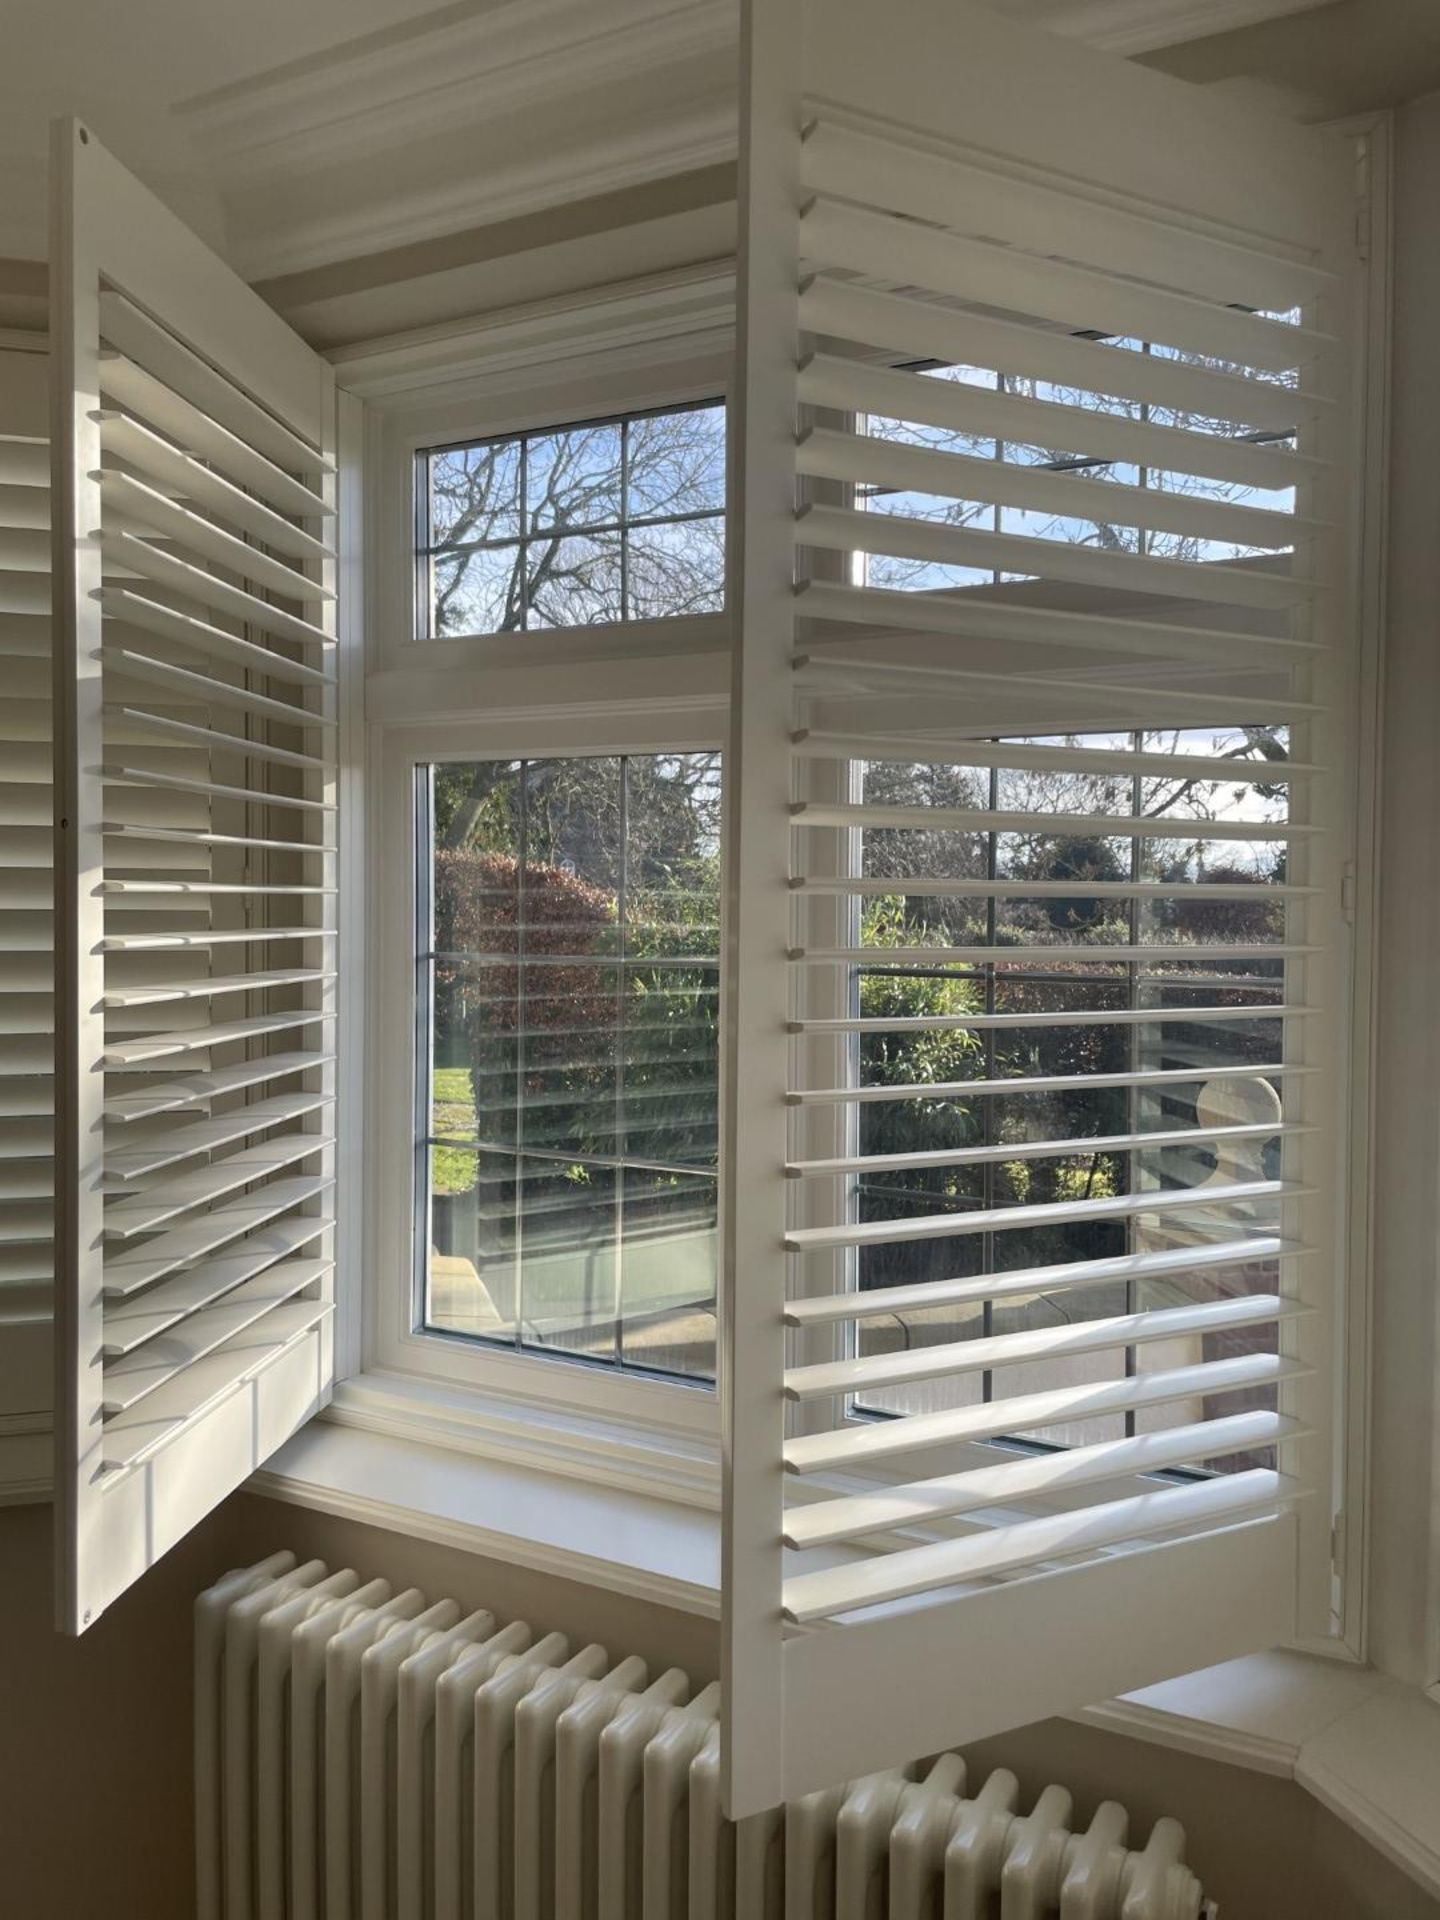 1 x Hardwood Timber Double Glazed Window Frames fitted with Shutter Blinds, In White - Ref: PAN102 - Image 2 of 13